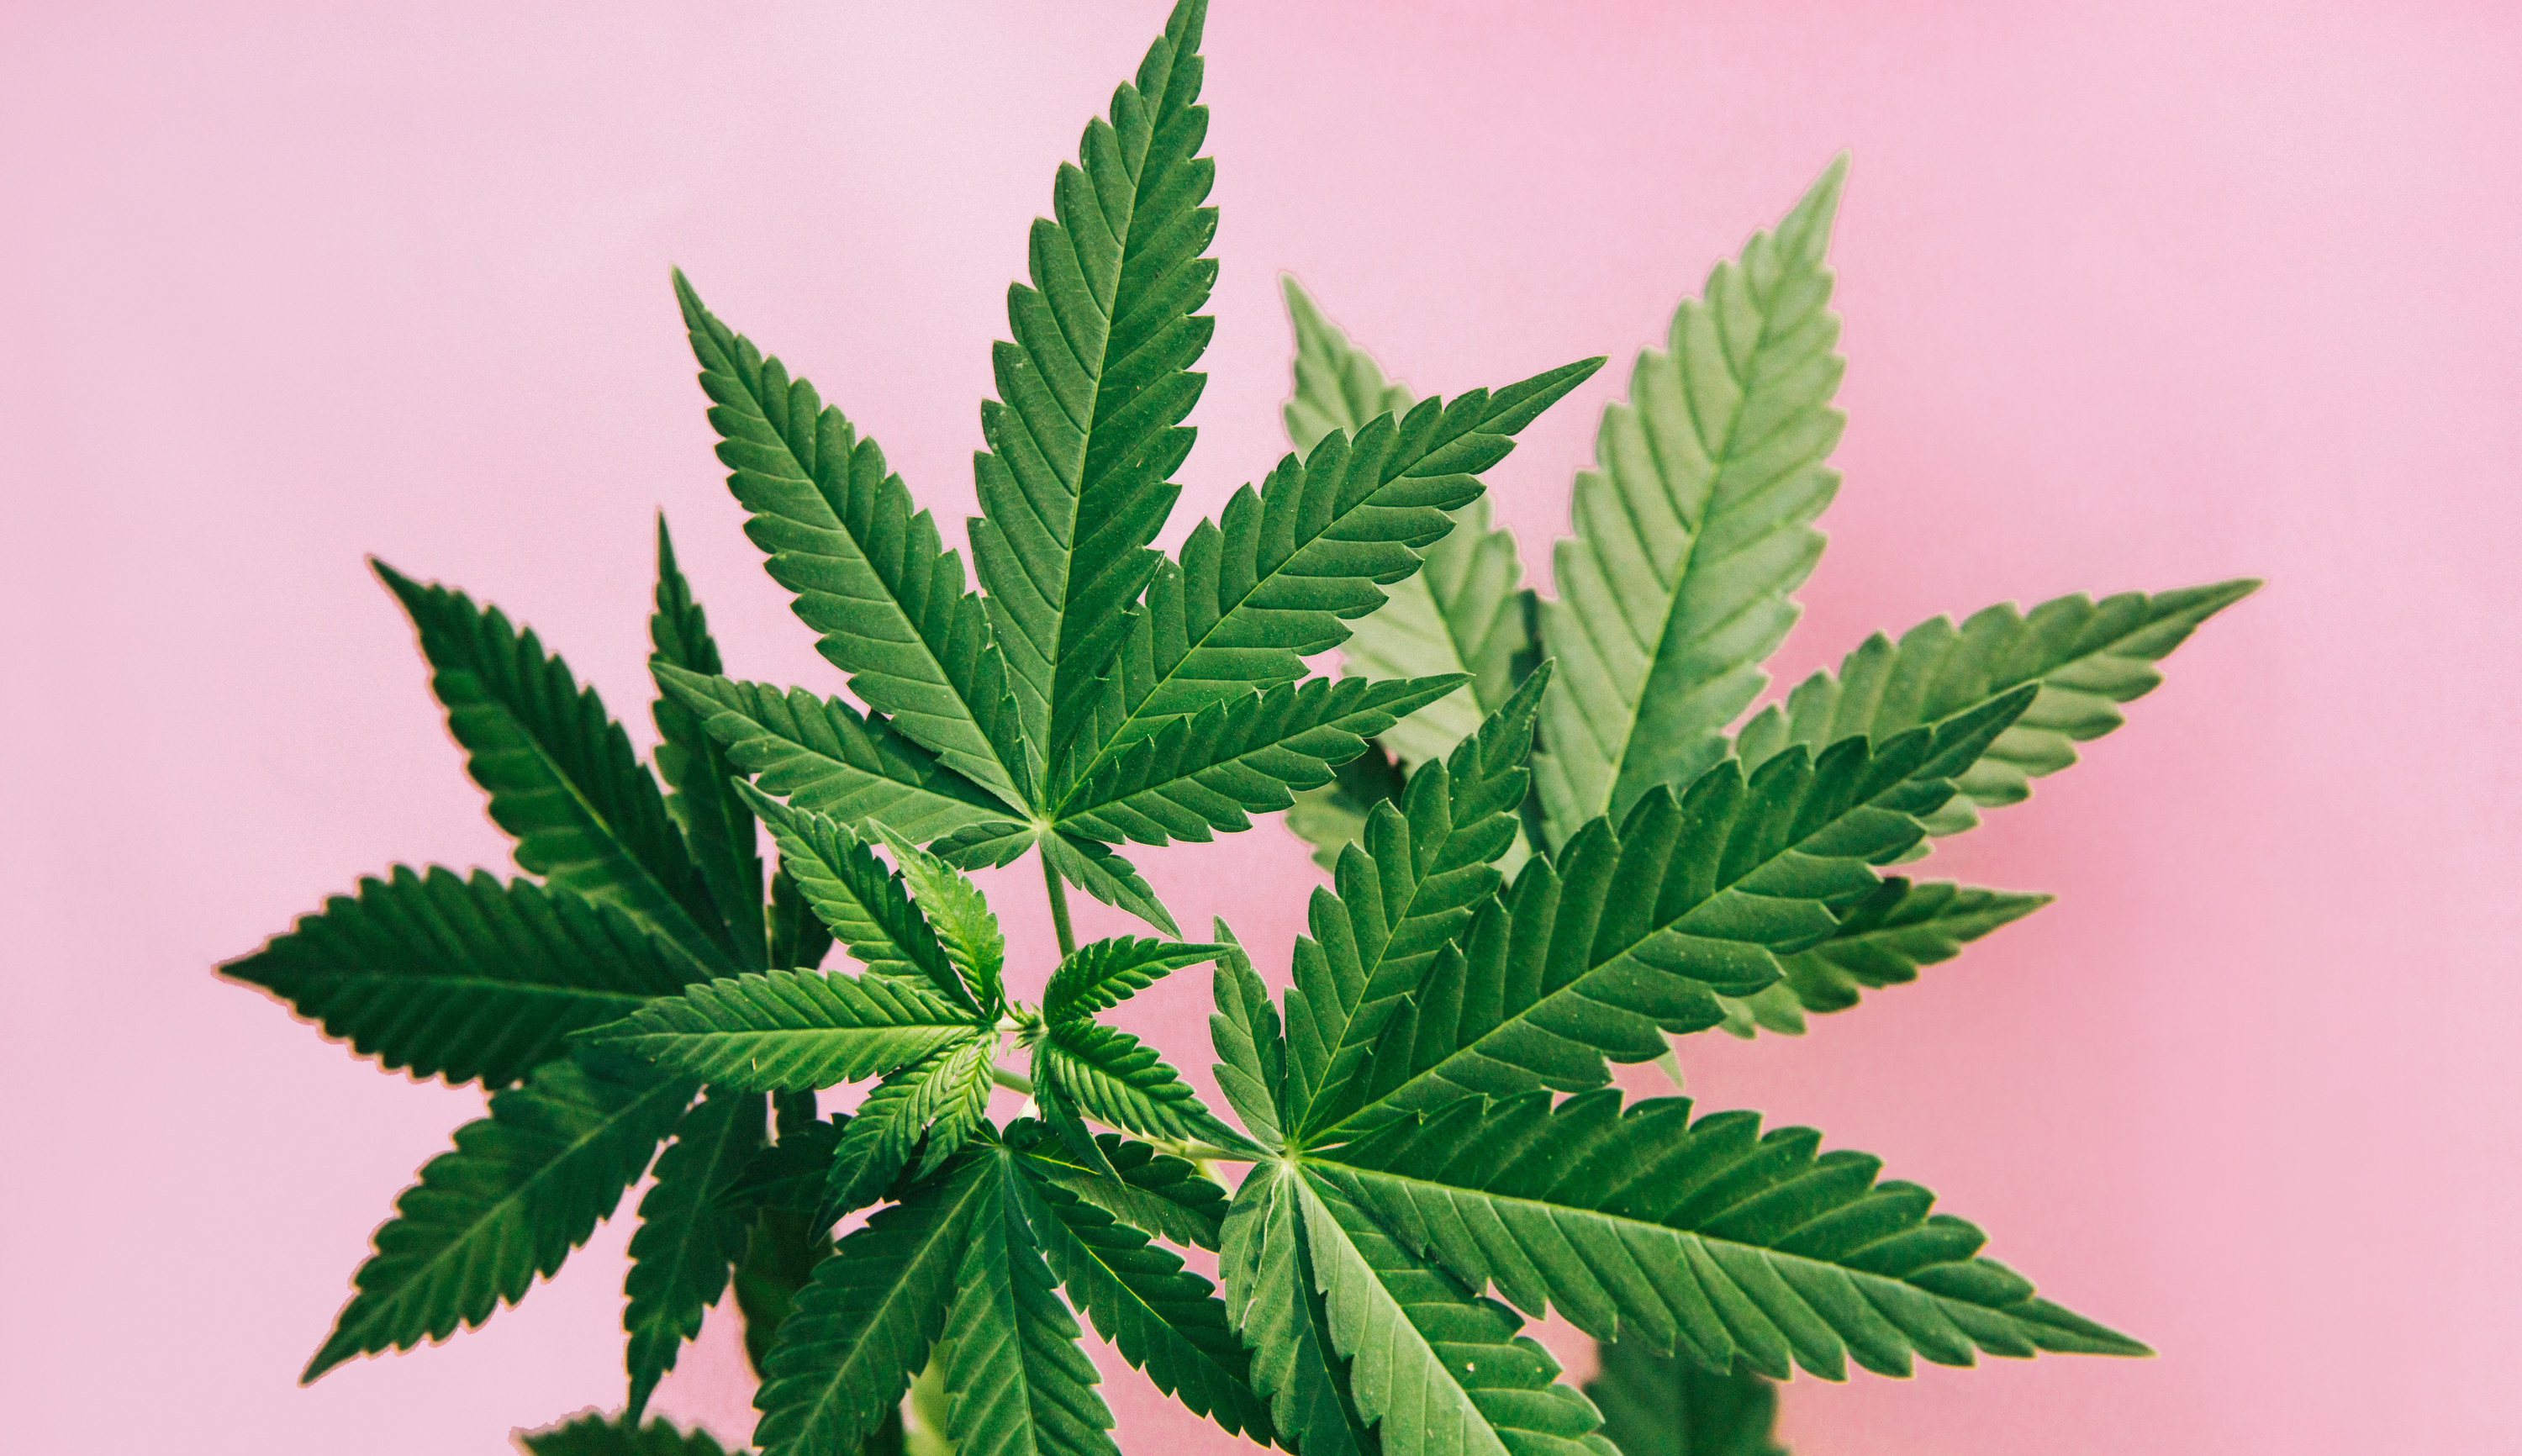 An image of the marijuana plant over a pink background